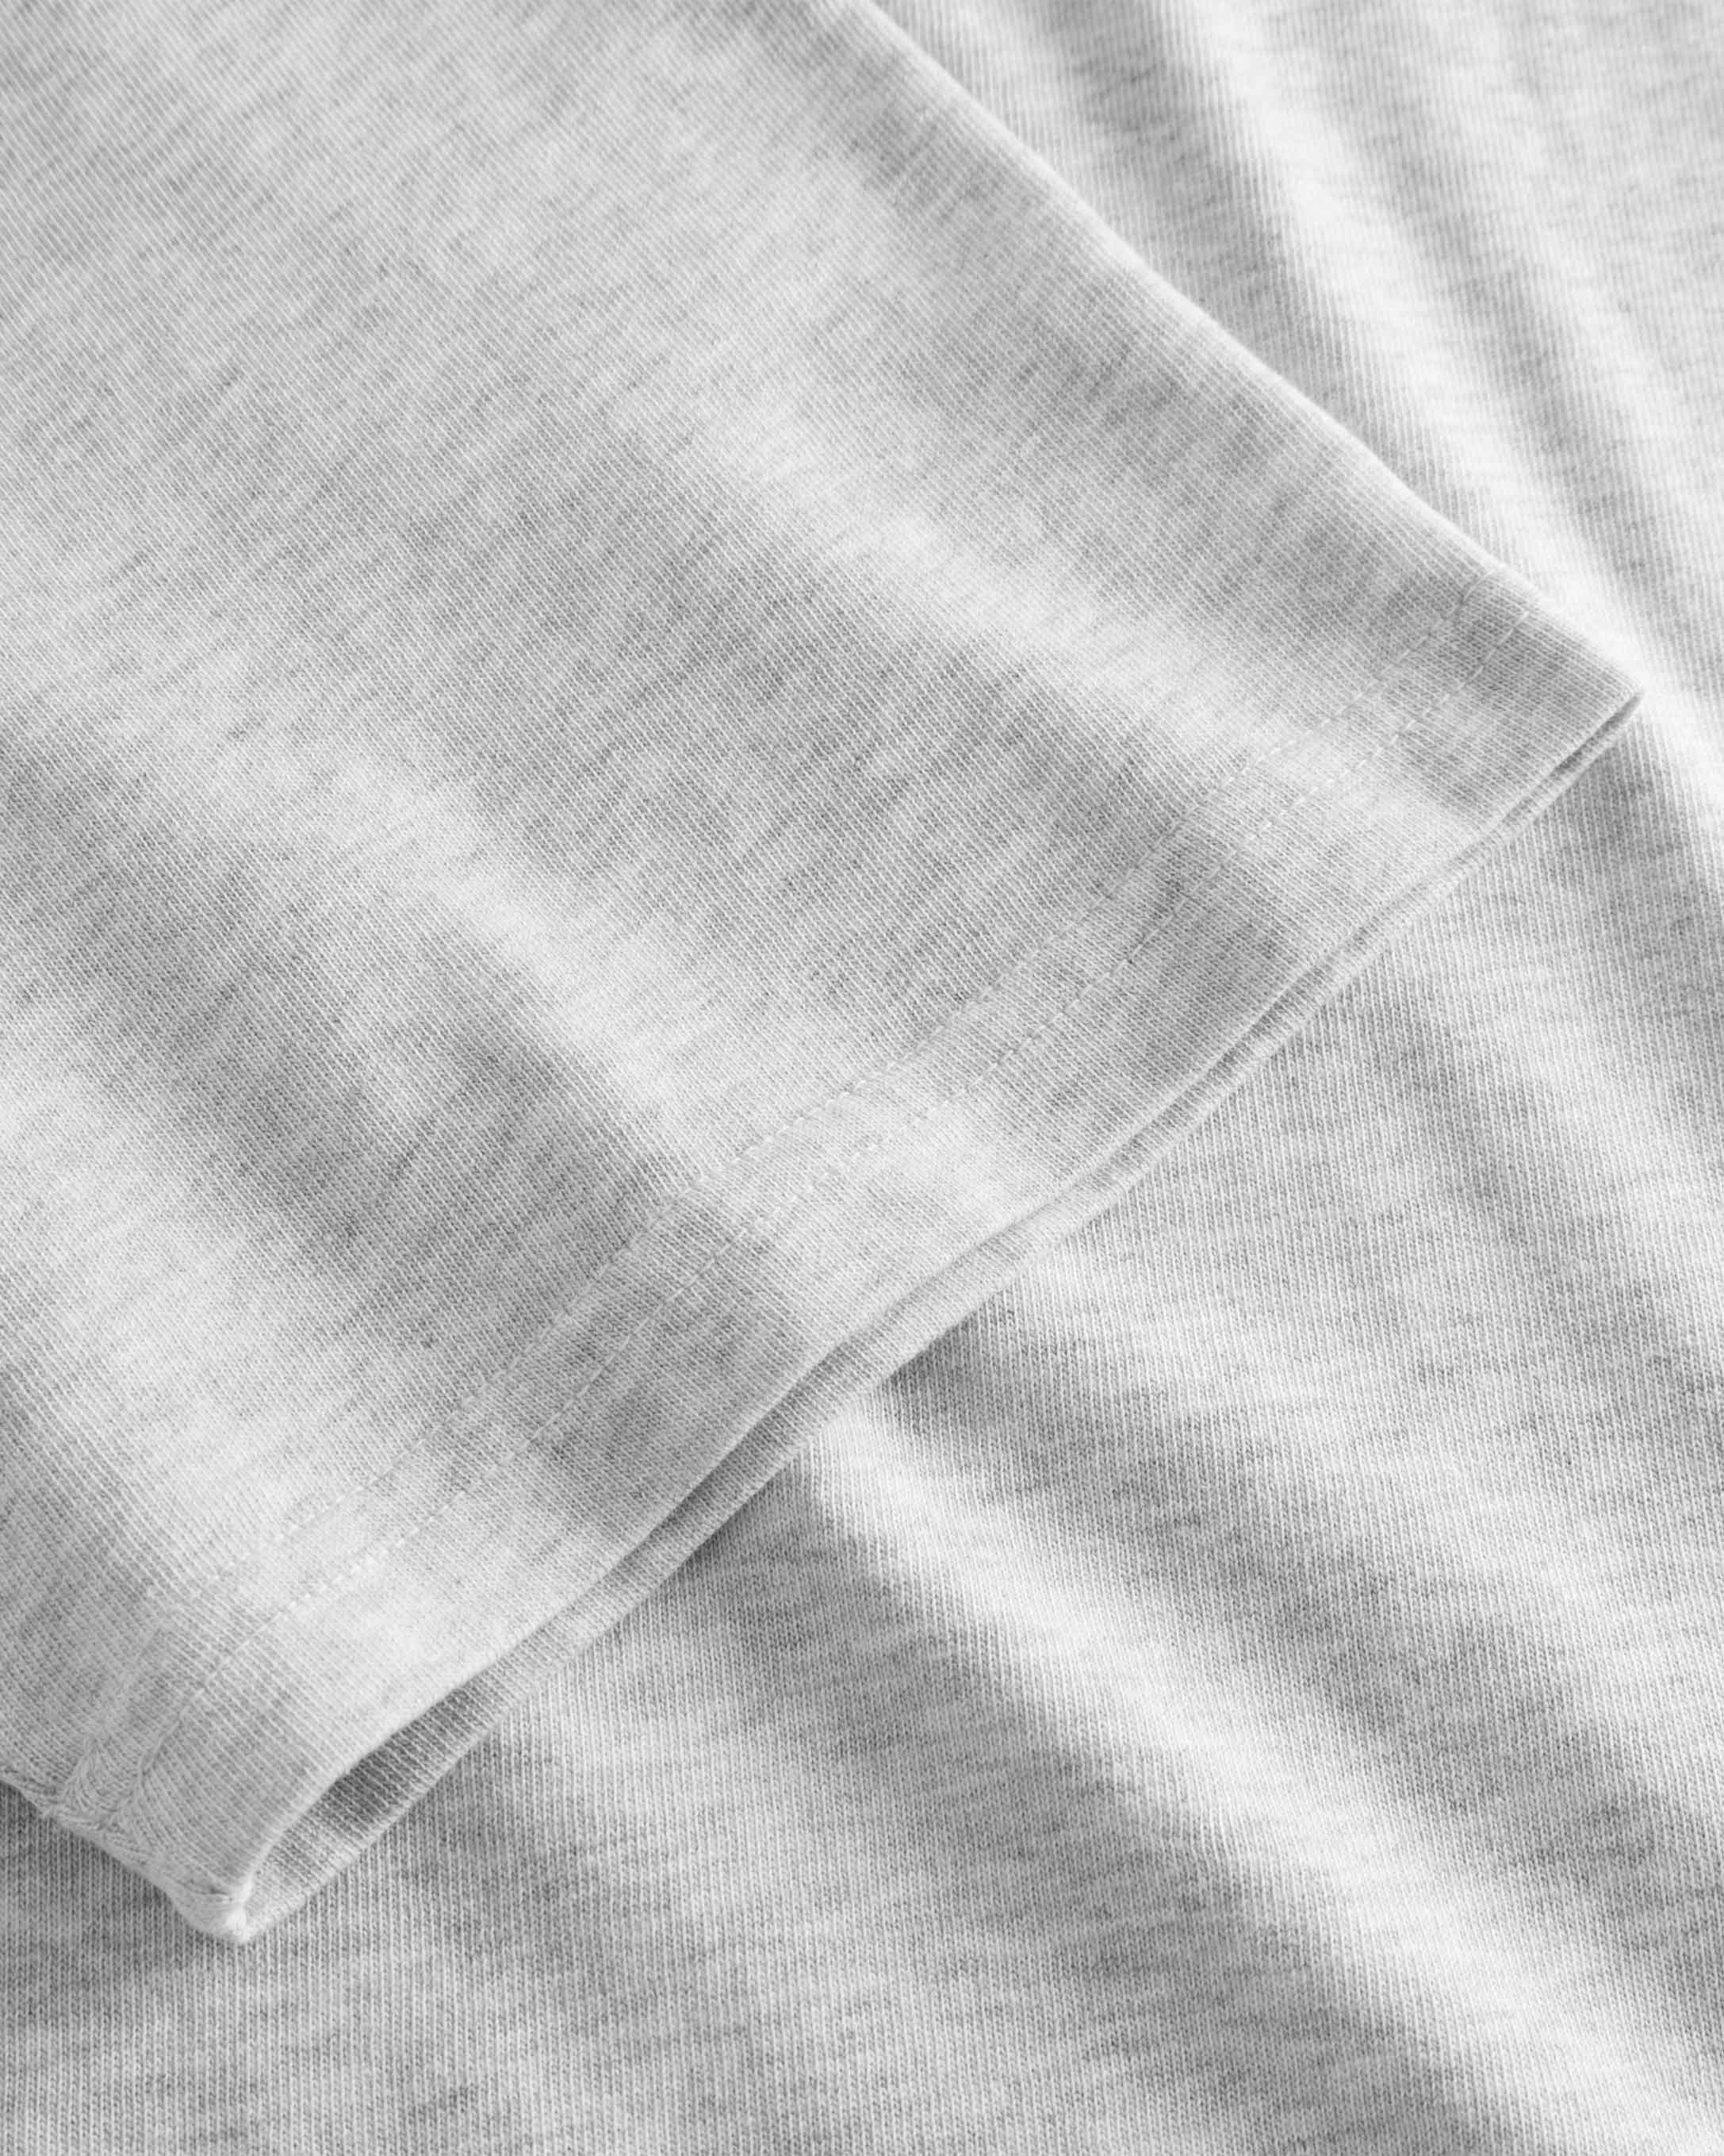 Close-up view of the stitchings on a grey t-shirt